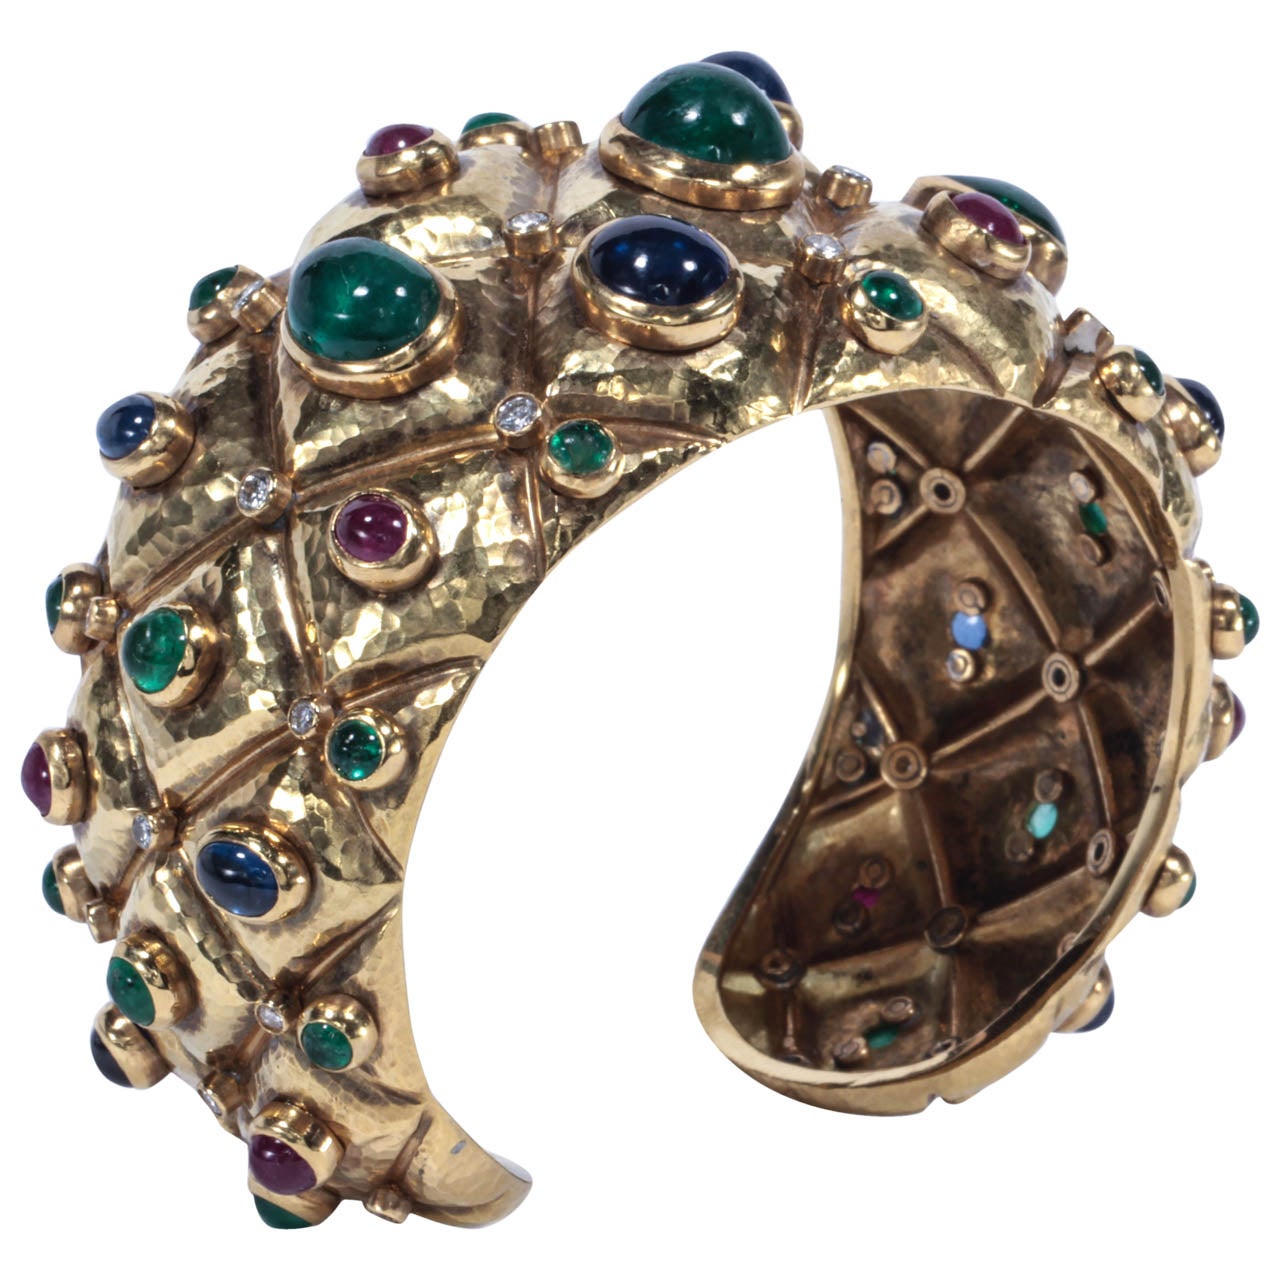 Hammered and decorated with cabochon Emeralds, Sapphires and Rubies and brilliant-cut diamonds.